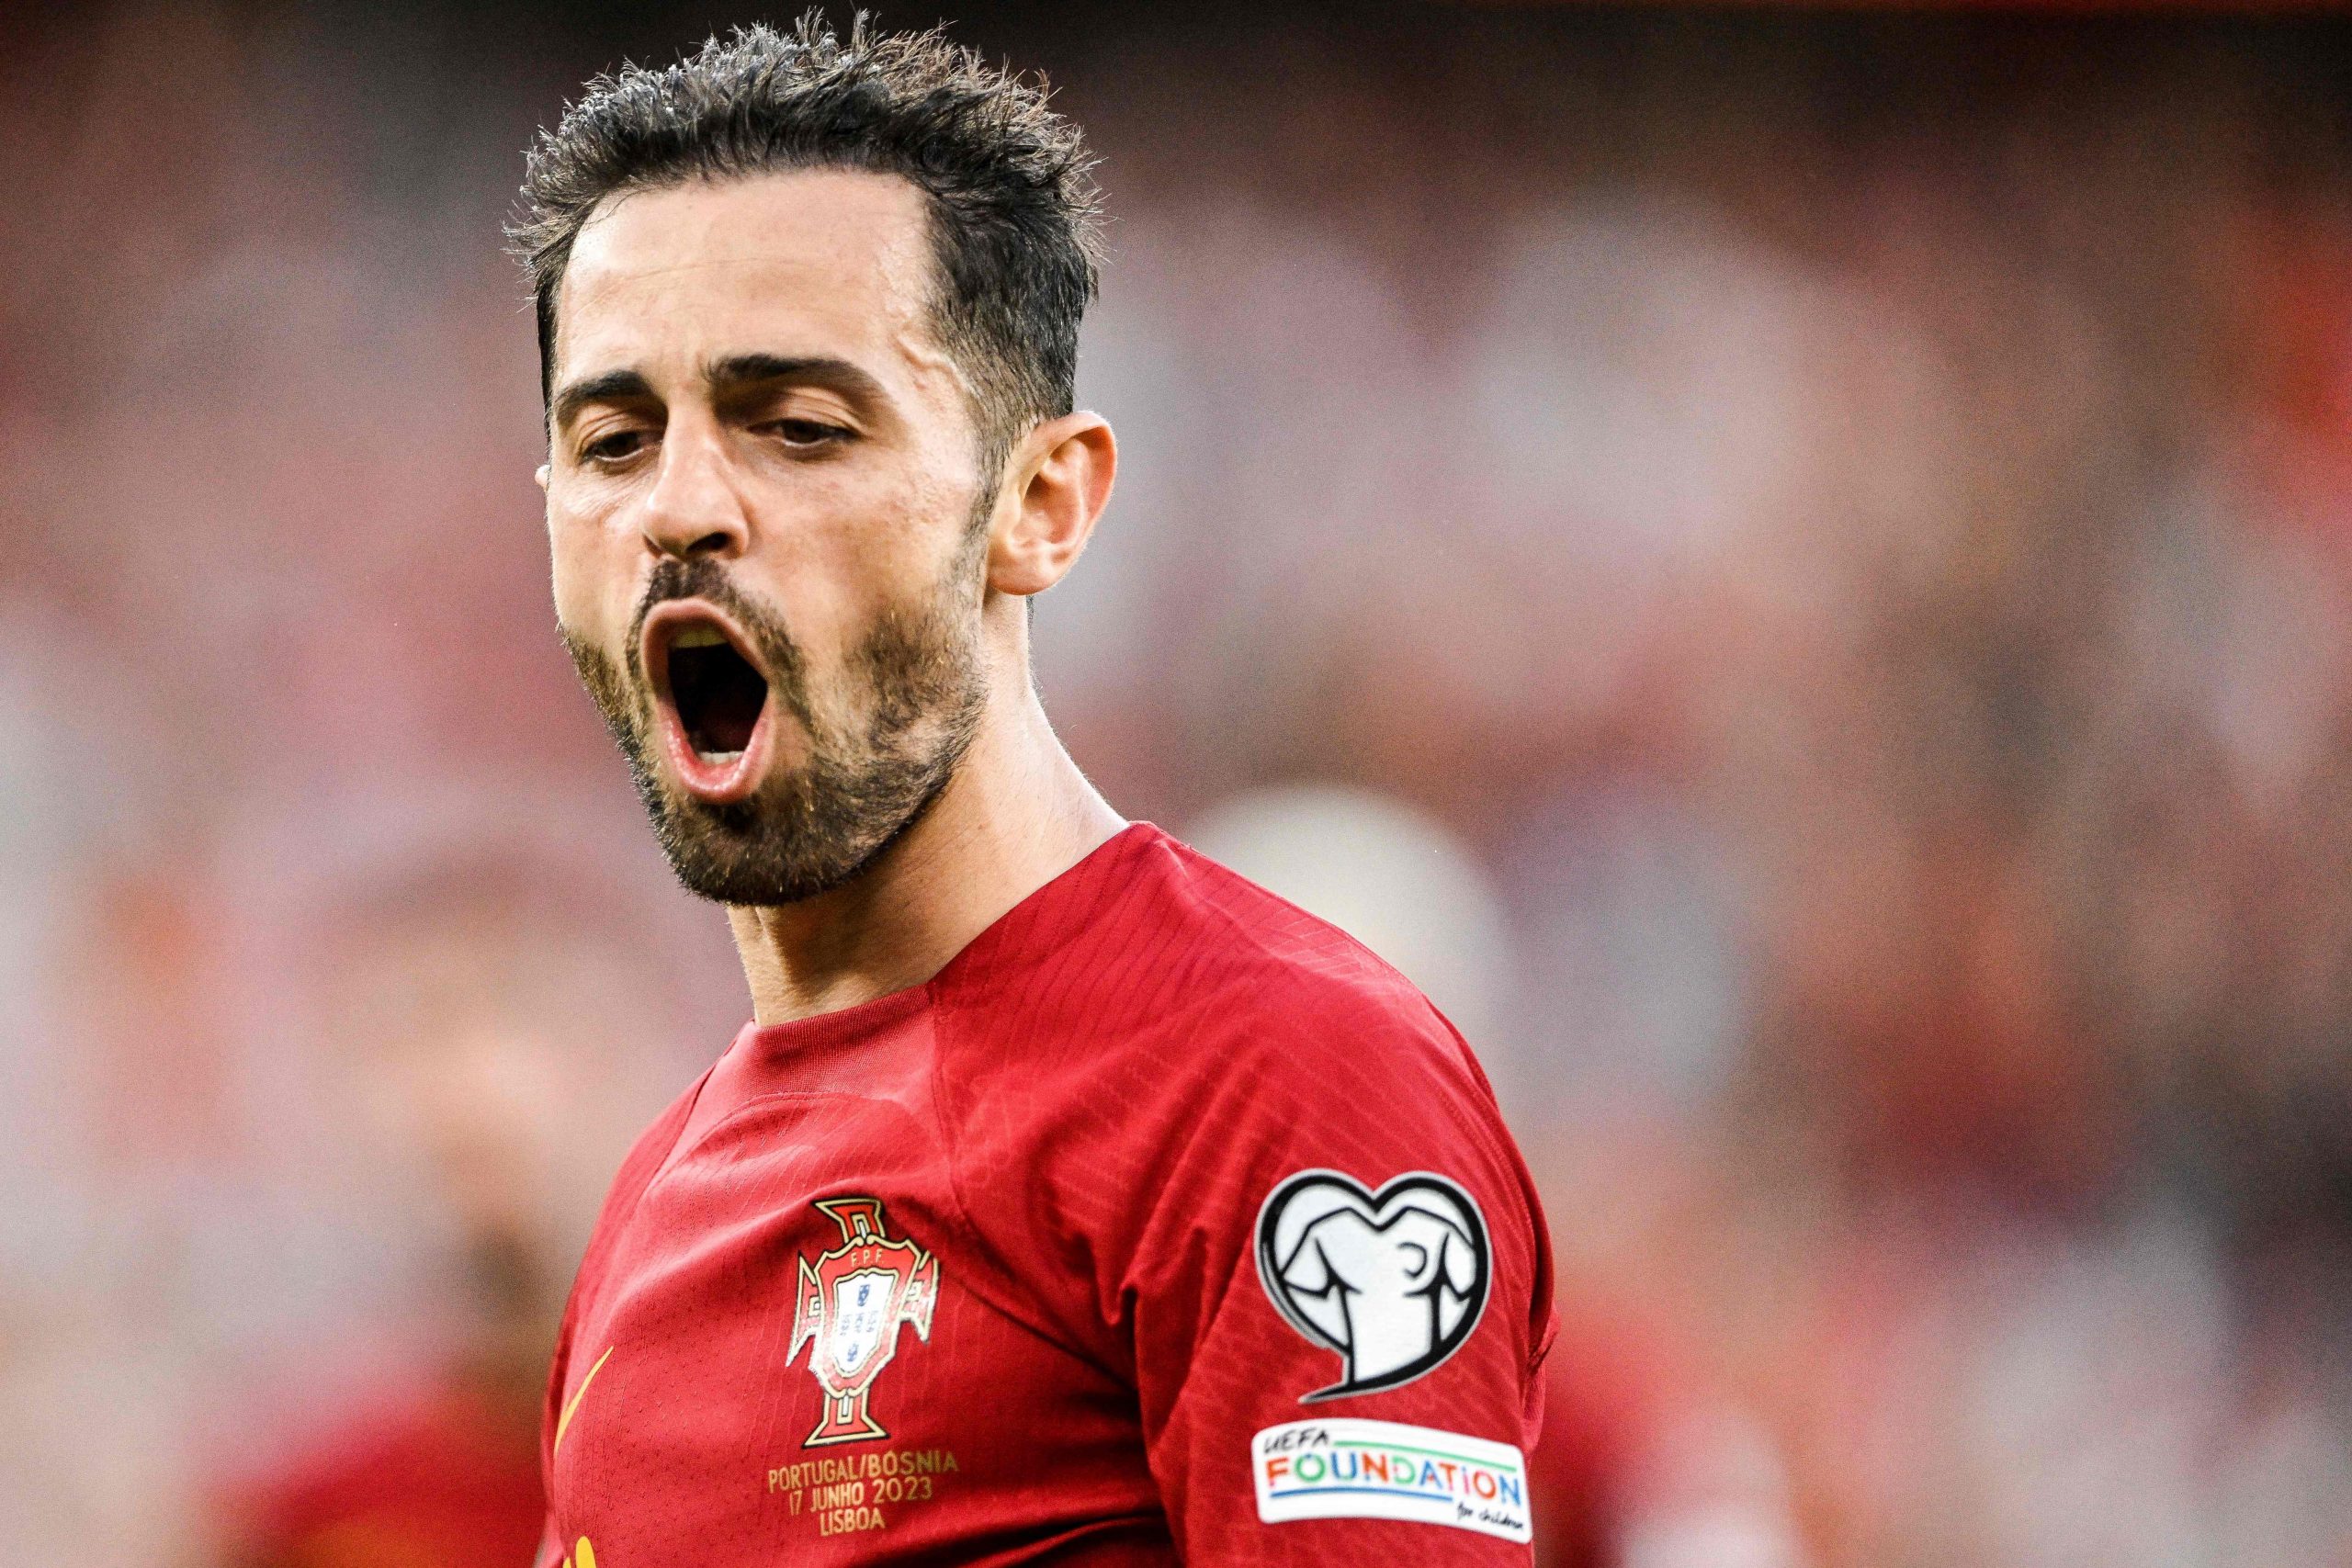 Portugal's midfielder Bernardo Silva celebrates after scoring his team's first goal during the UEFA Euro 2024 group J qualification football match between Portugal and Bosnia-Herzegovina at the Luz stadium in Lisbon on June 17, 2023. (Photo by Patricia DE MELO MOREIRA / AFP) (Photo by PATRICIA DE MELO MOREIRA/AFP via Getty Images)